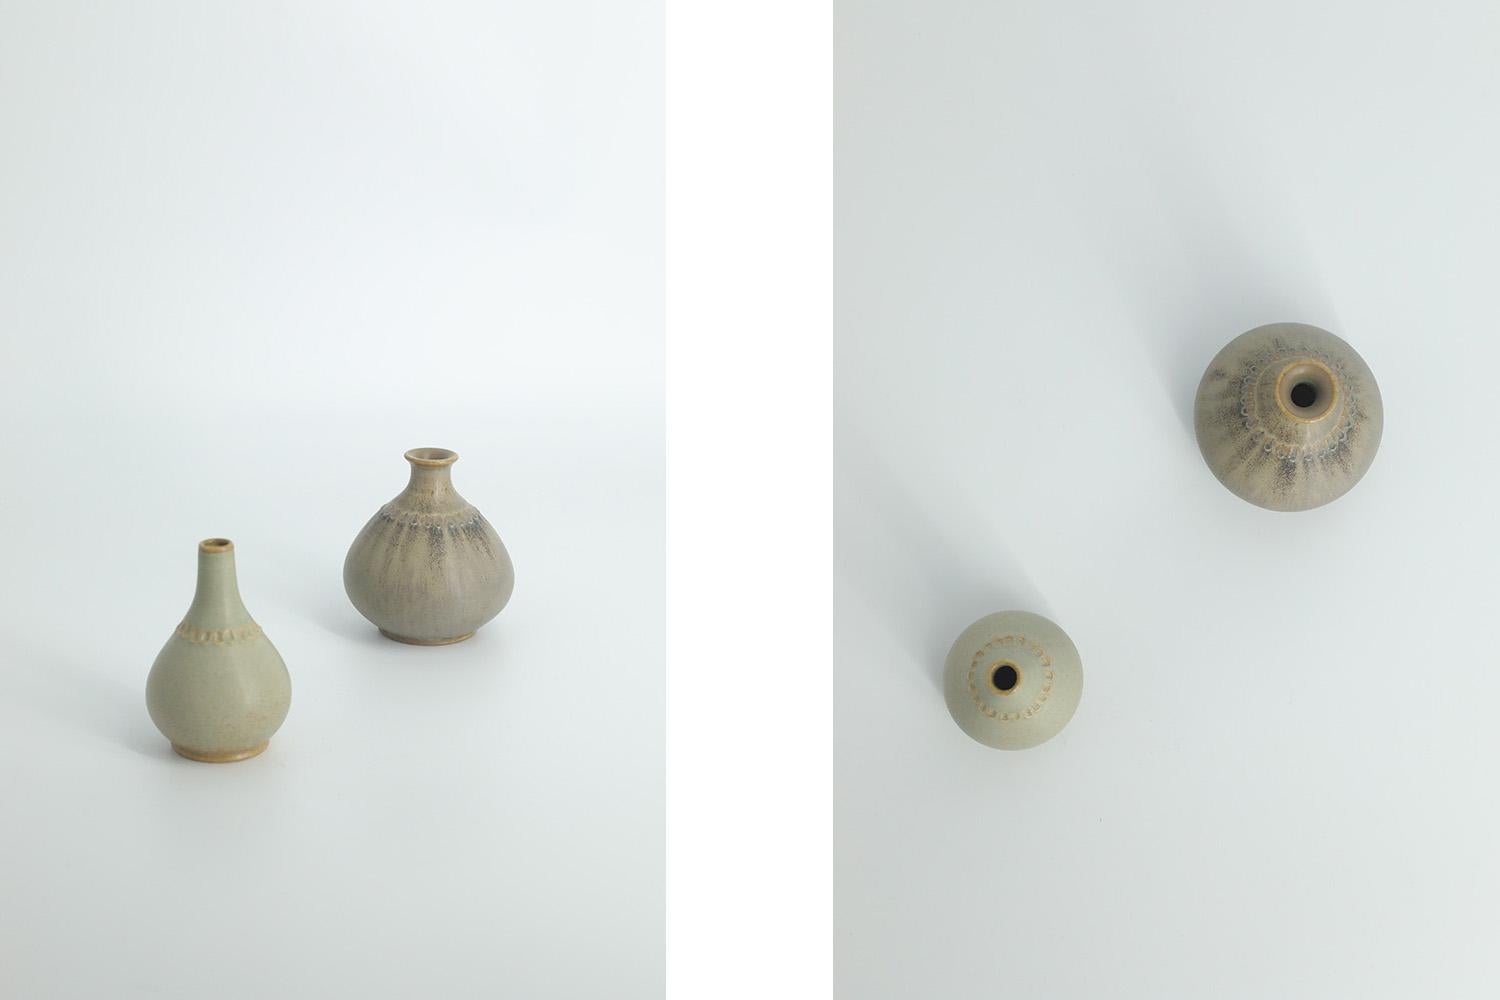 Height 7.5 cm  Width 7.5 cm  Depth 7.5 cm
Height 7.5 cm  Width 5 cm  Depth 5 cm

This set of 2 miniature vases was designed by Gunnar Borg for the Swedish manufacture Gunnars Keramik Höganäs during the 1960s. Handmade by the Master, with the utmost